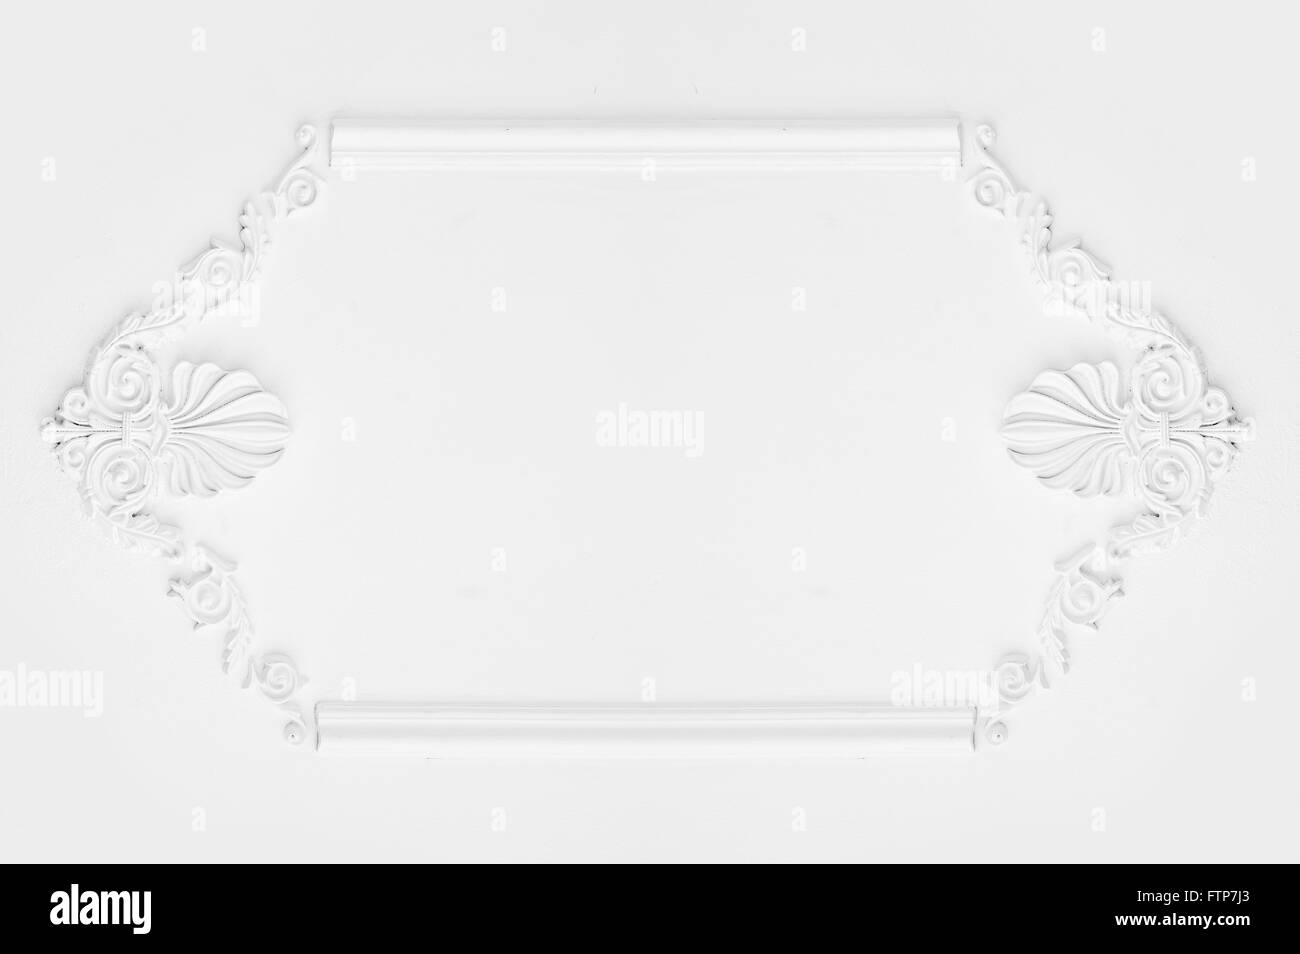 Architectural luxury white wall design with mouldings Stock Photo